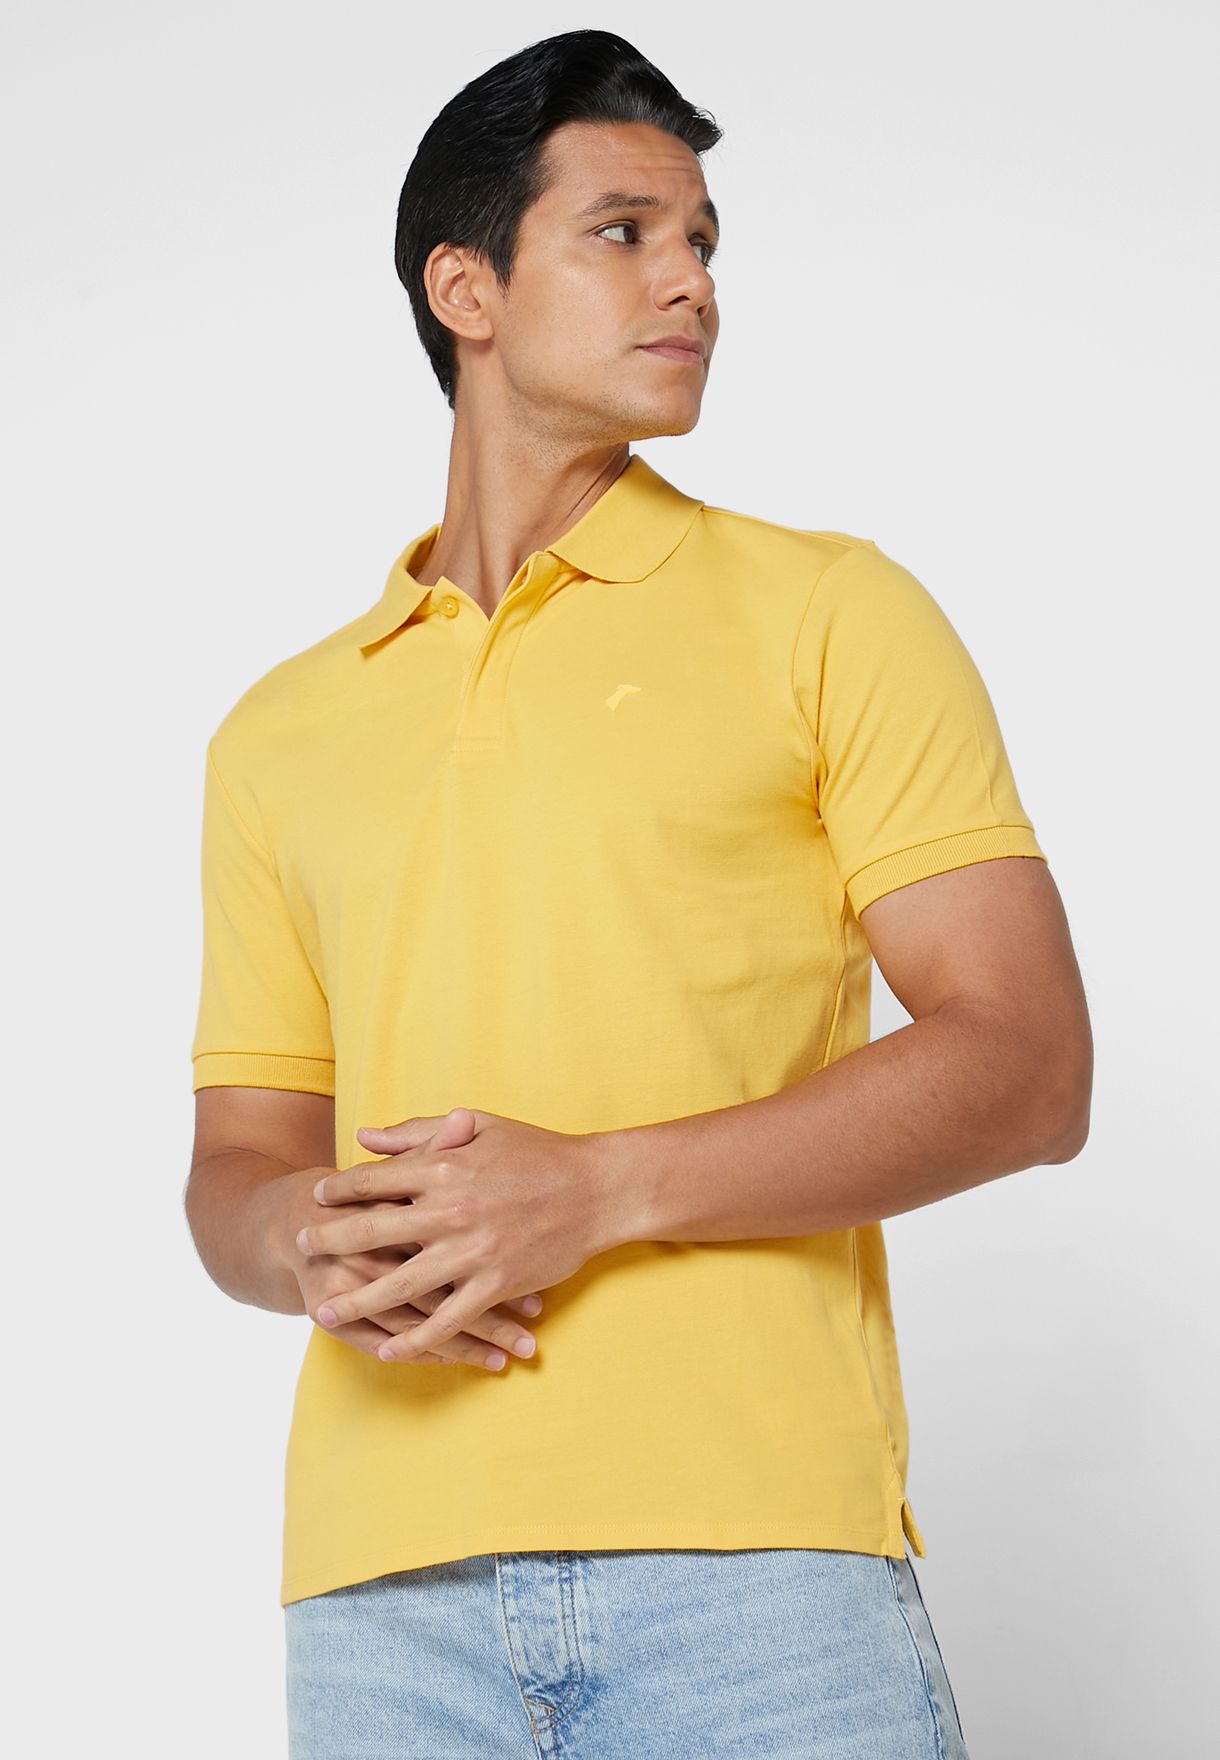 Yellow M discount 95% MEN FASHION Shirts & T-shirts Combined Sacoor Brothers polo 